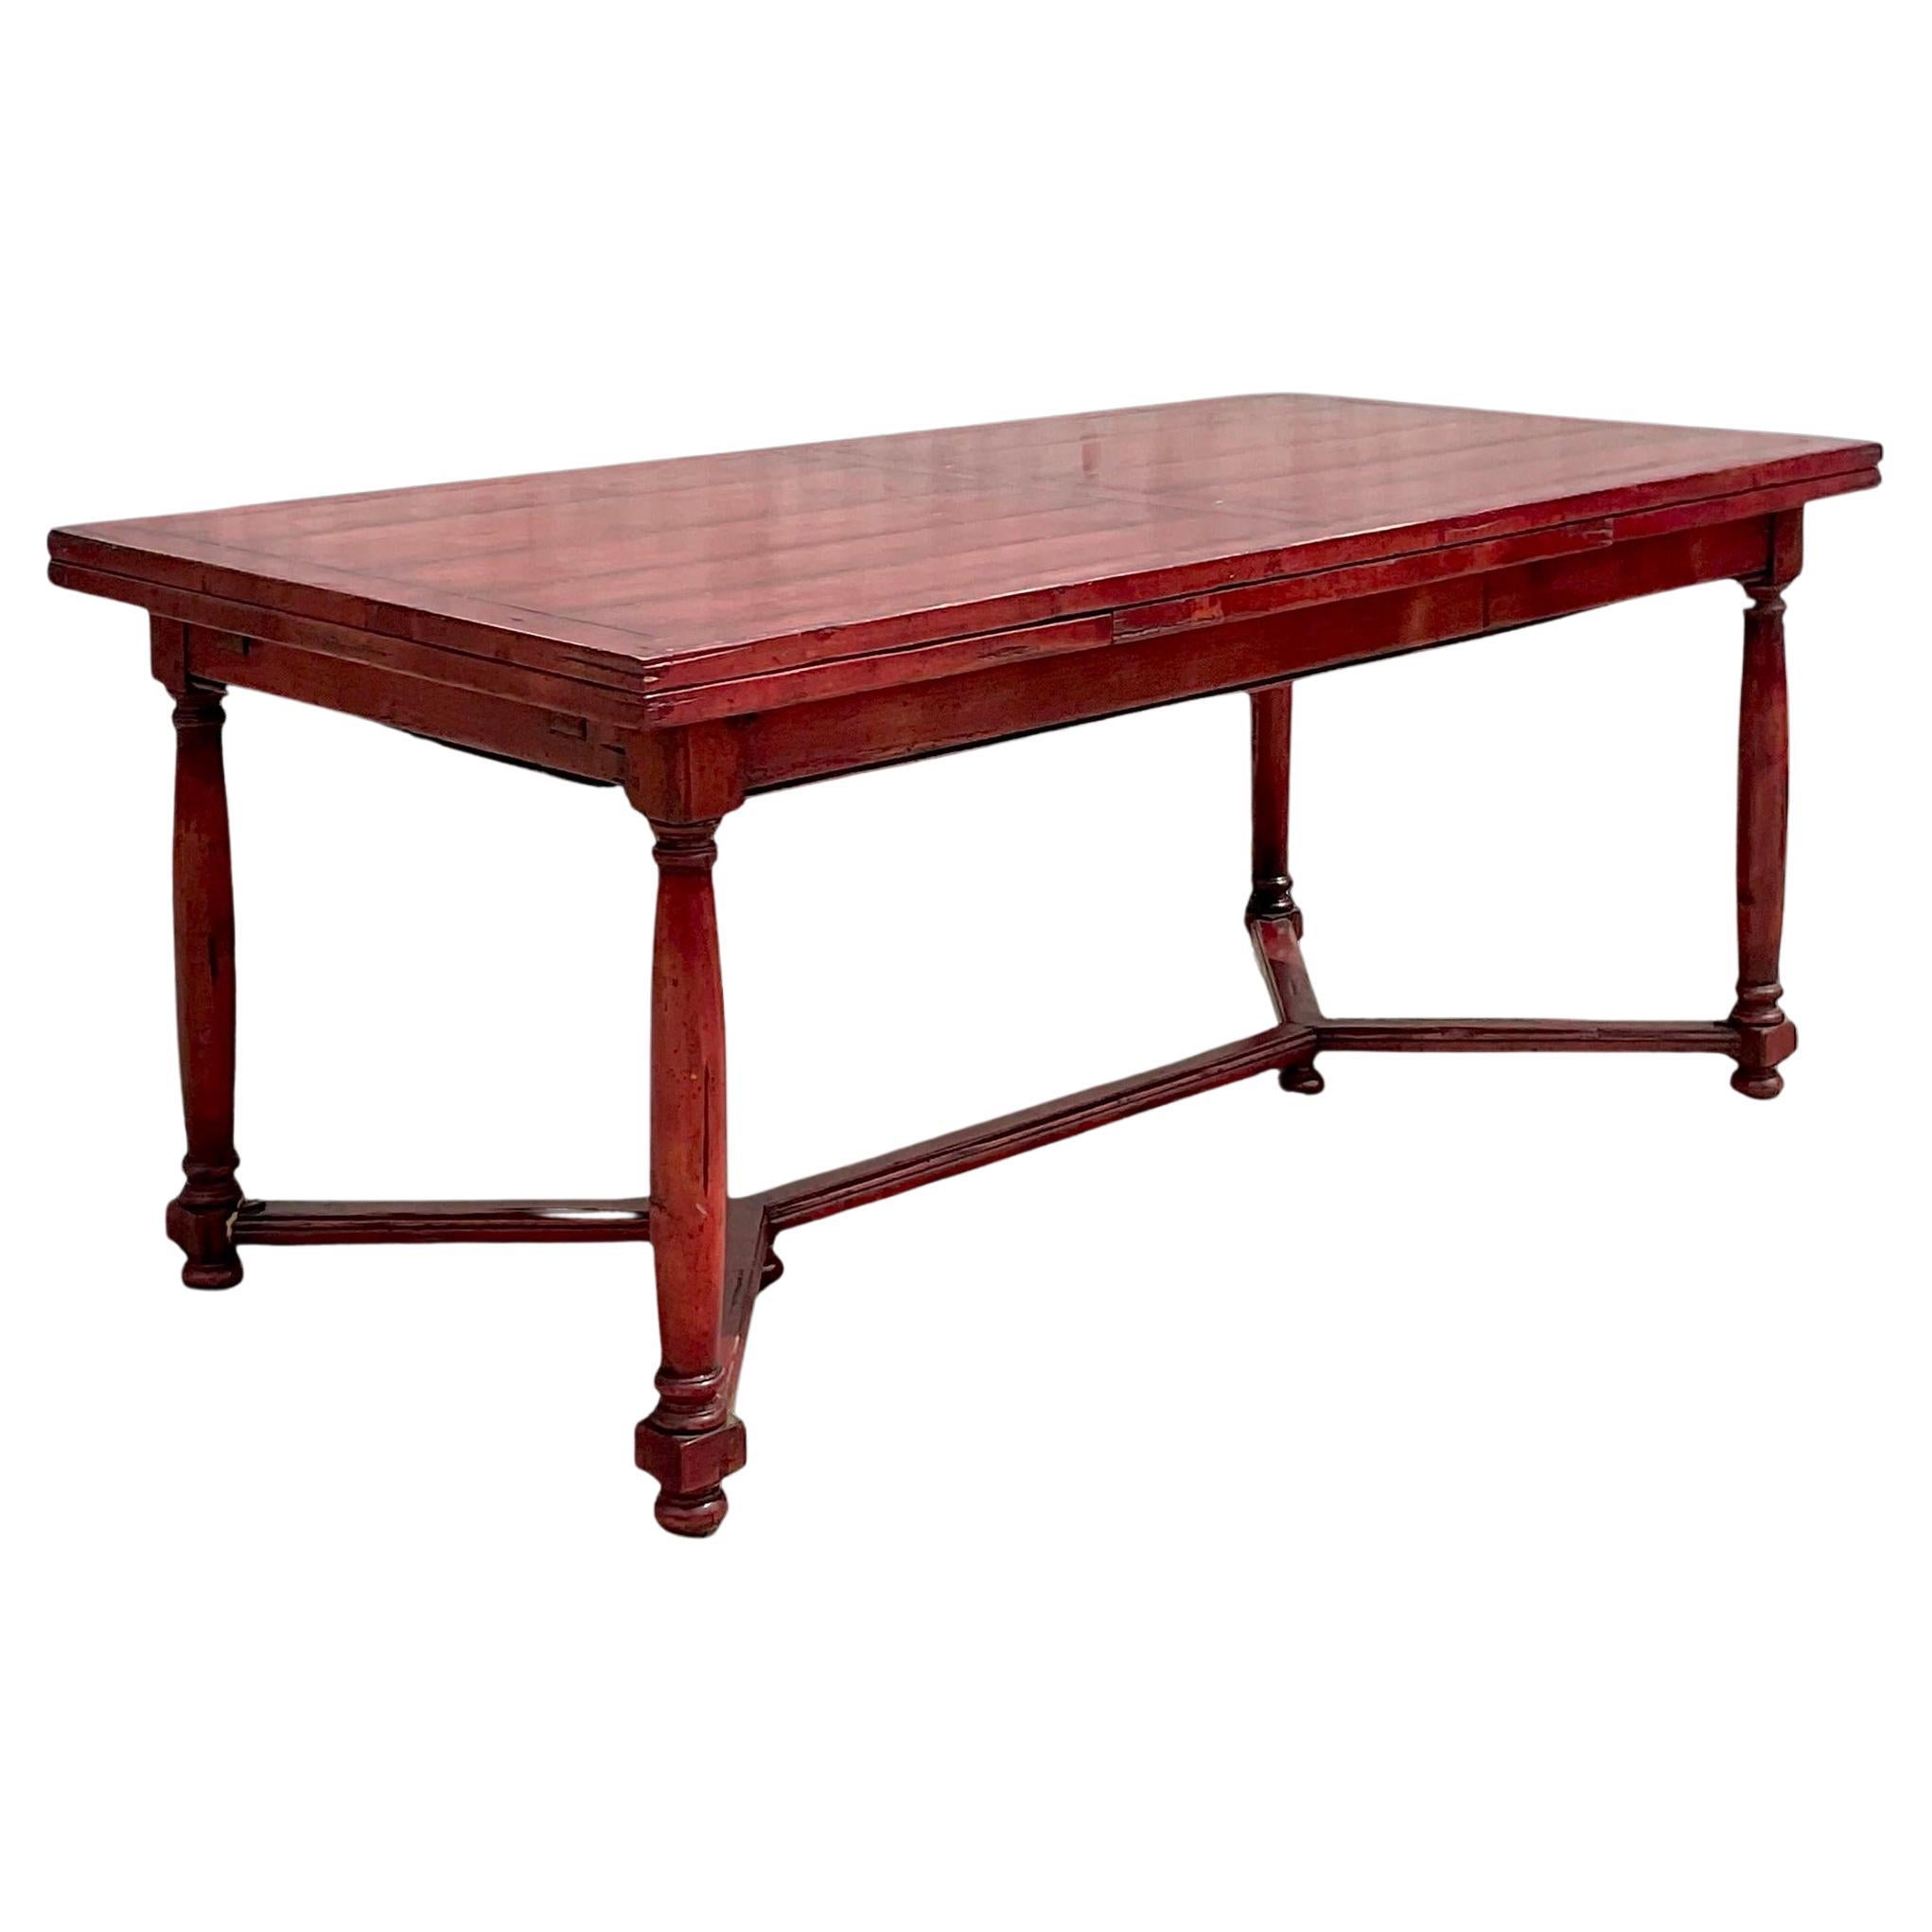 What is the best wood to use for a farmhouse table?